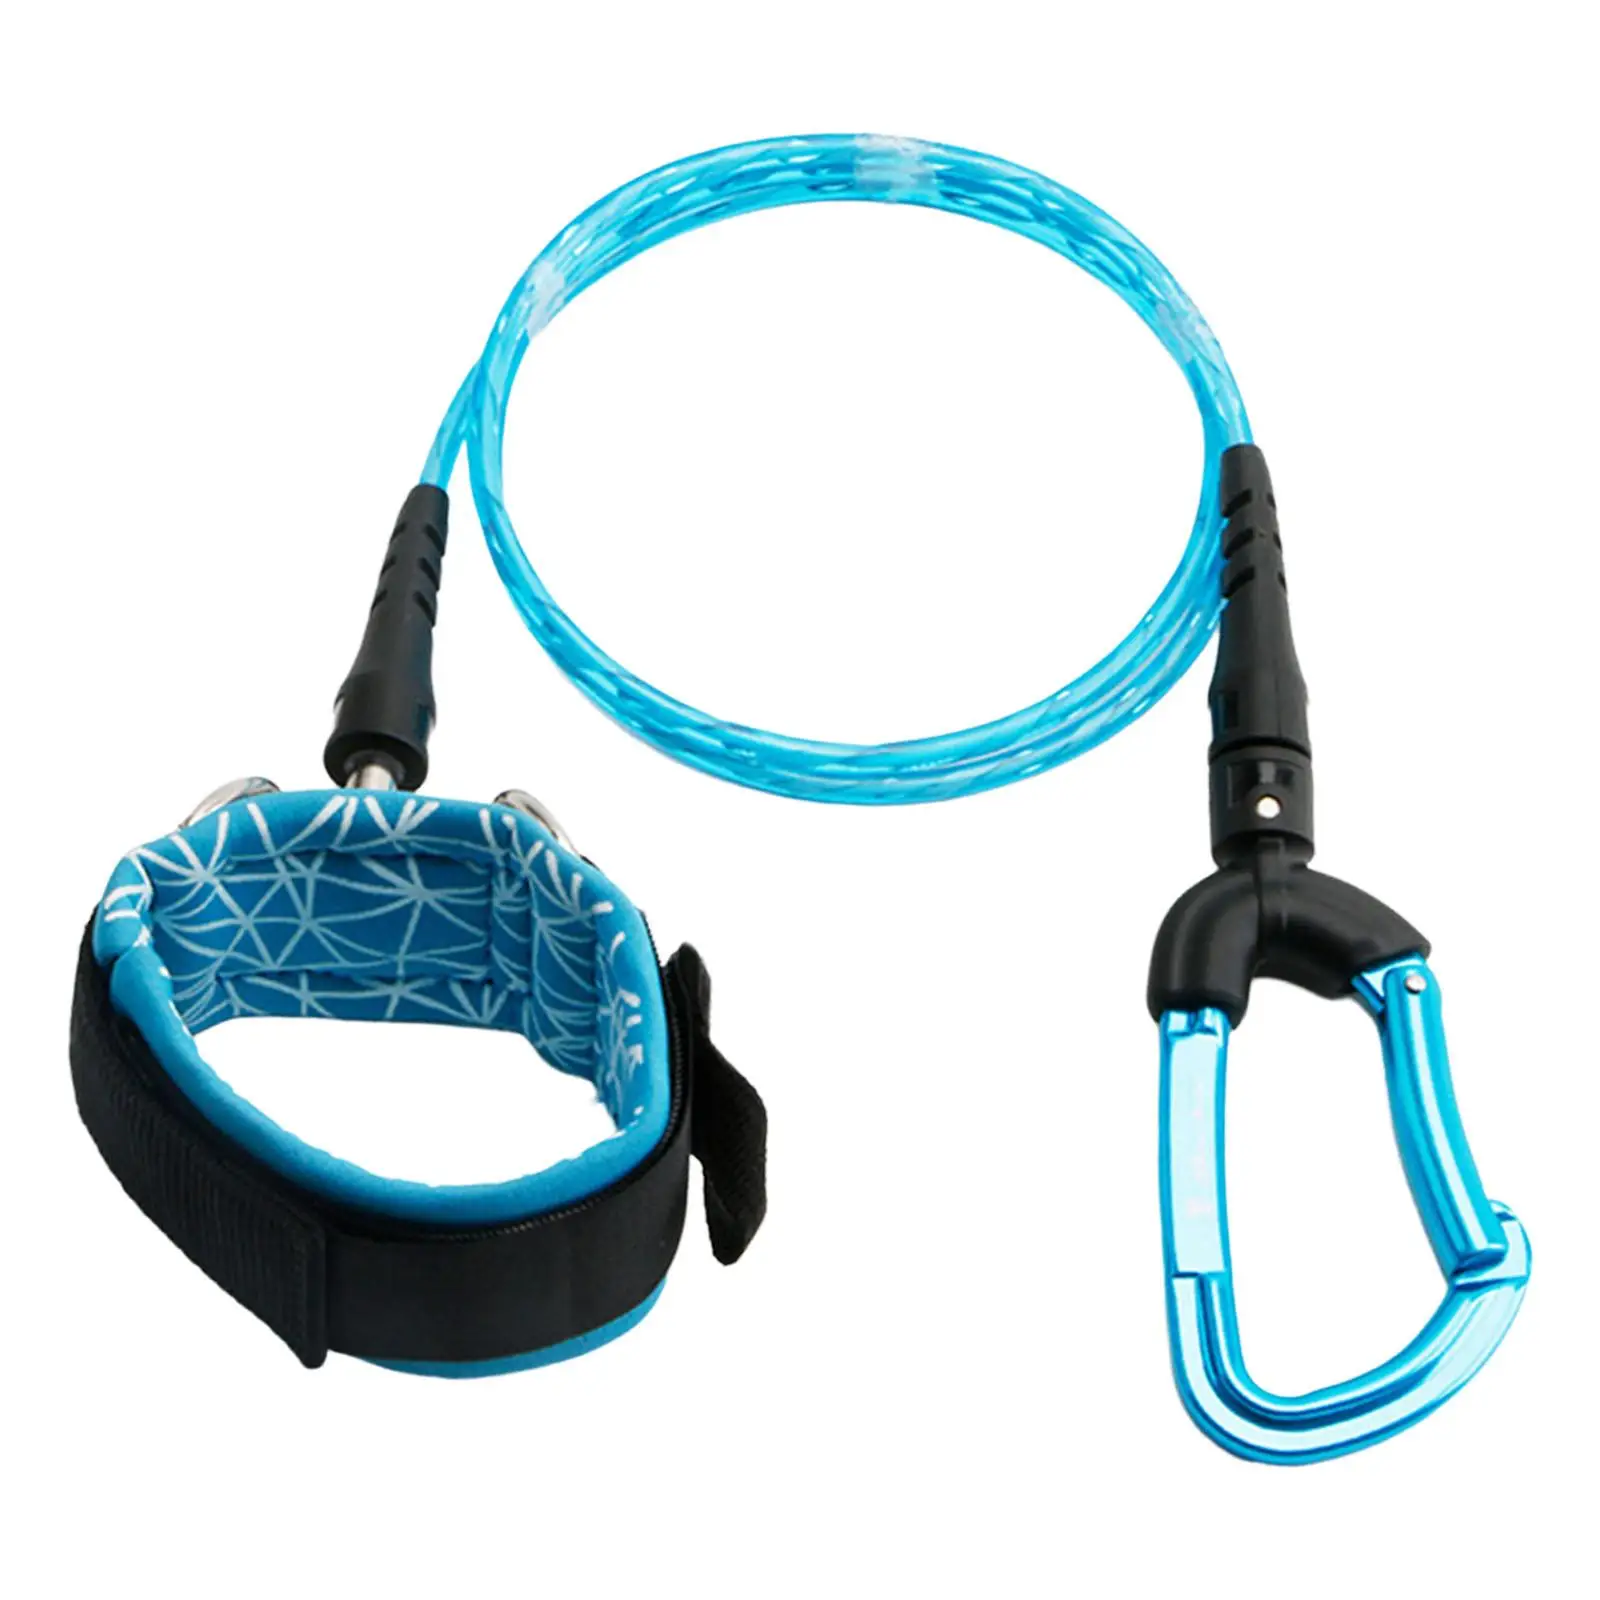 Freediving Lanyard Adjustable Professional Breaking kN Dive Wristband for Freediving